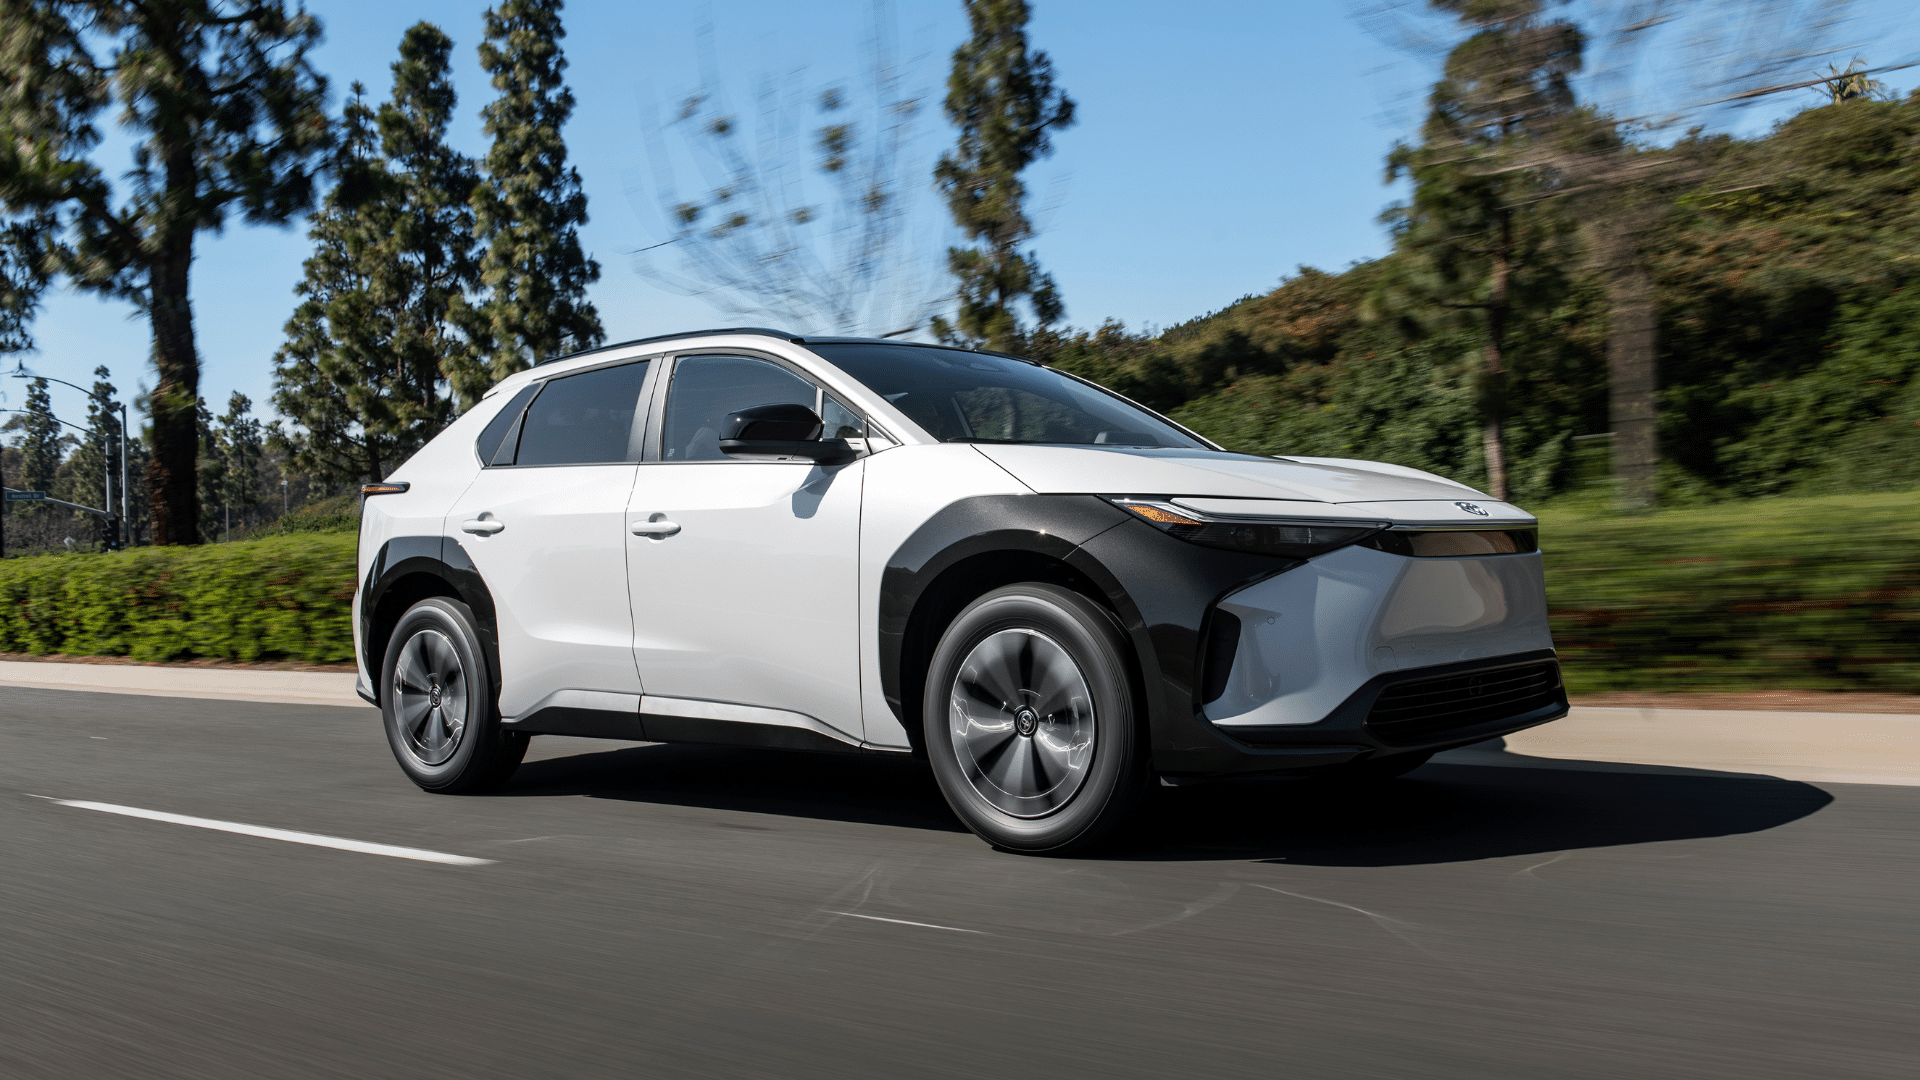 EnergyHub and Toyota collaborate to support the electrical grid and improve EV ownership experience